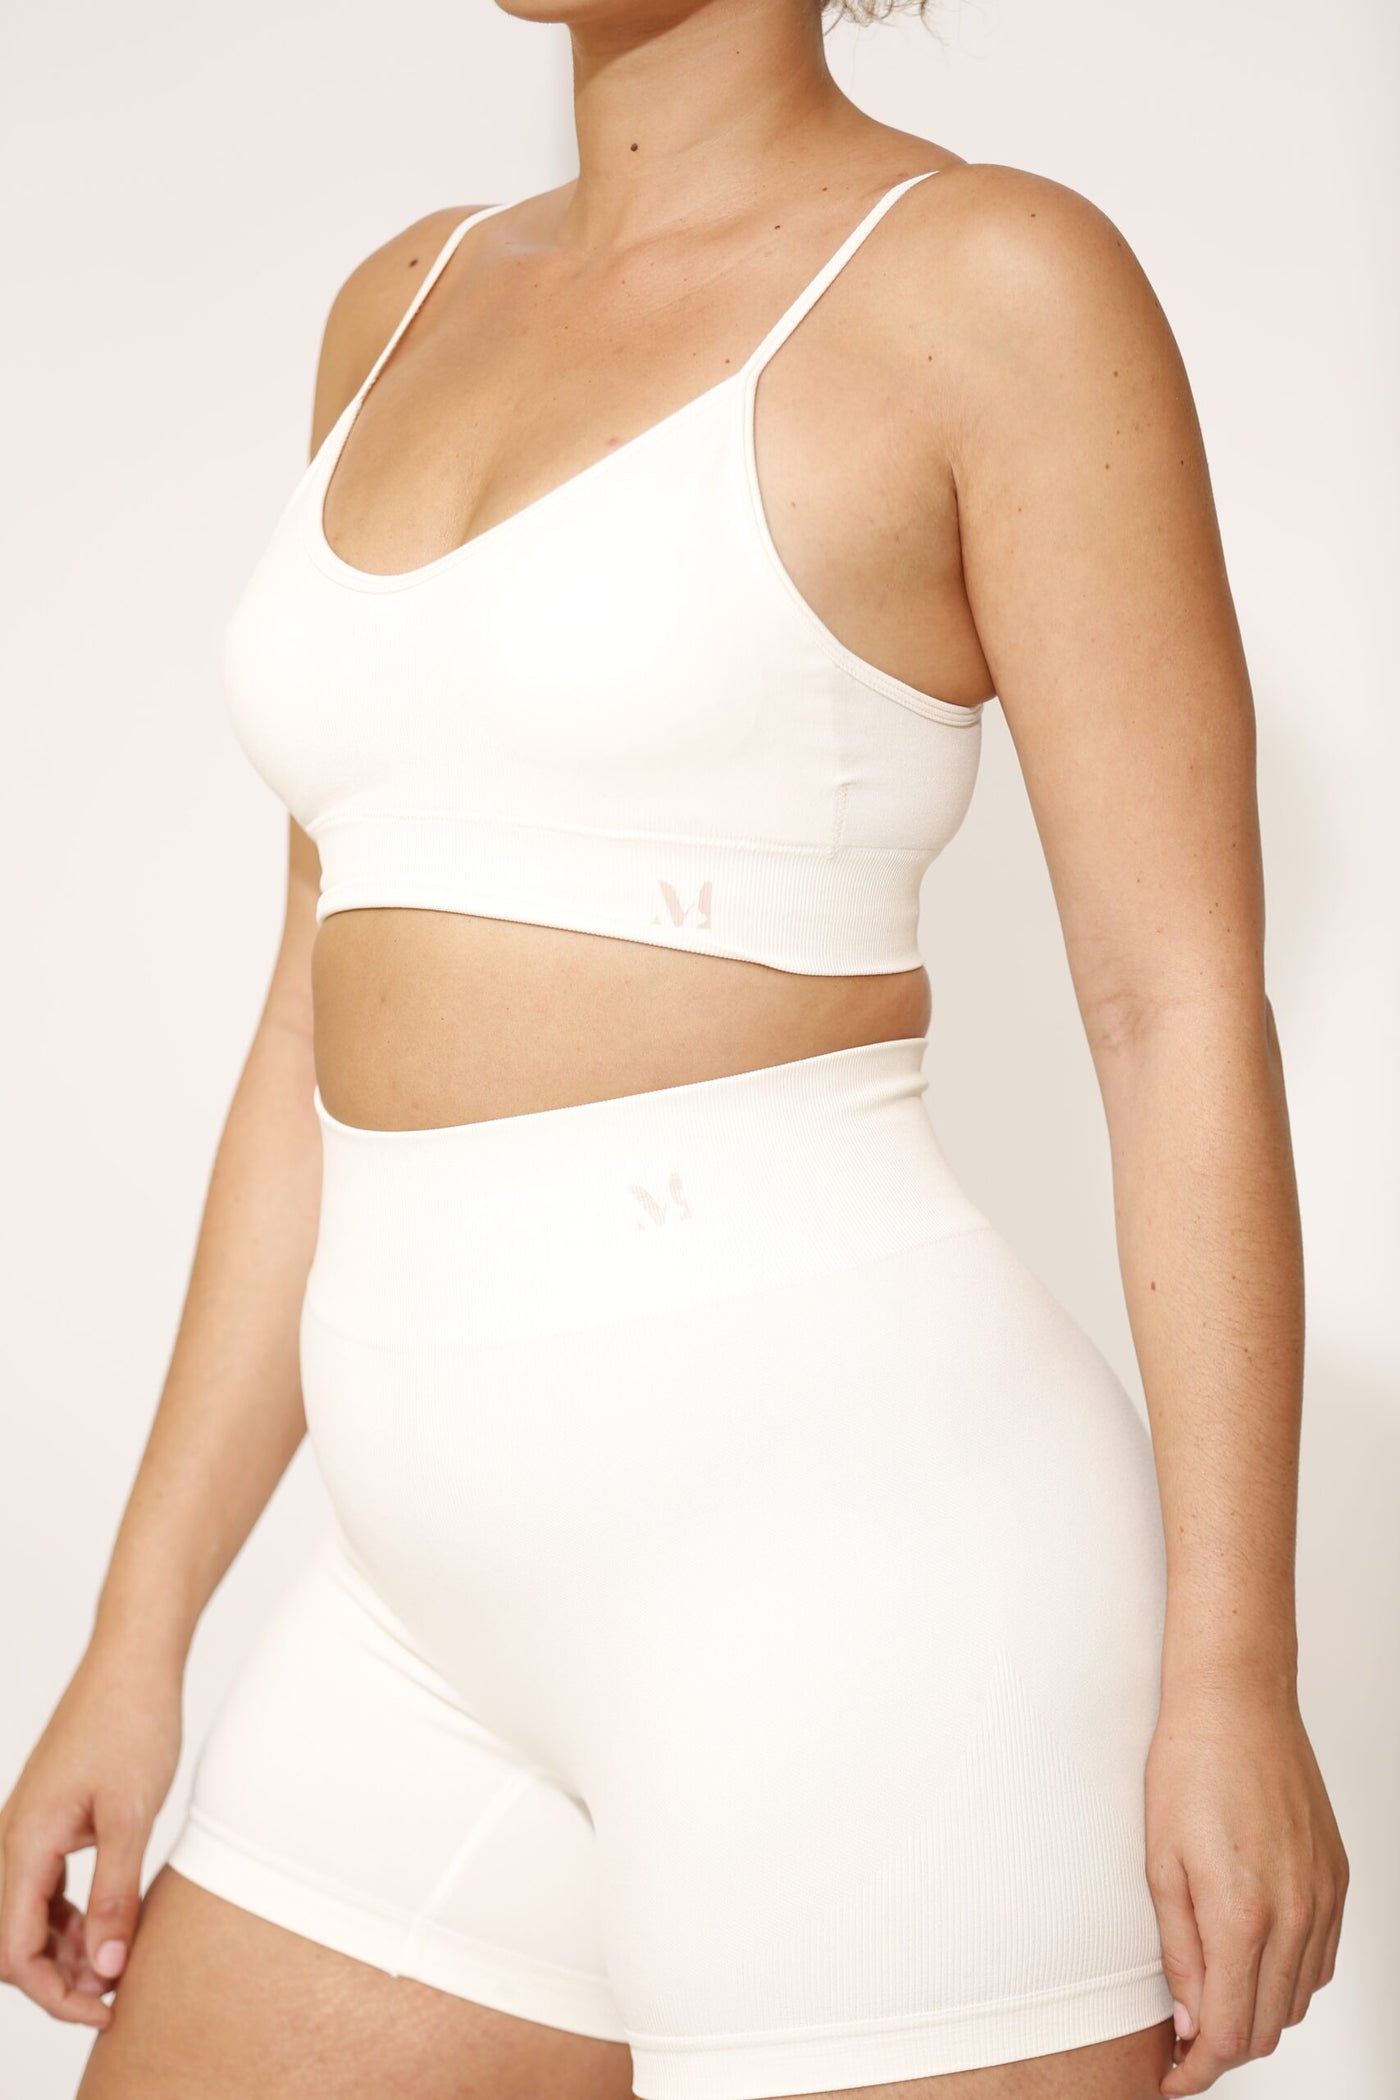 Buy the MoldMe By Molly Amare Bra Top in Coconut Milk on